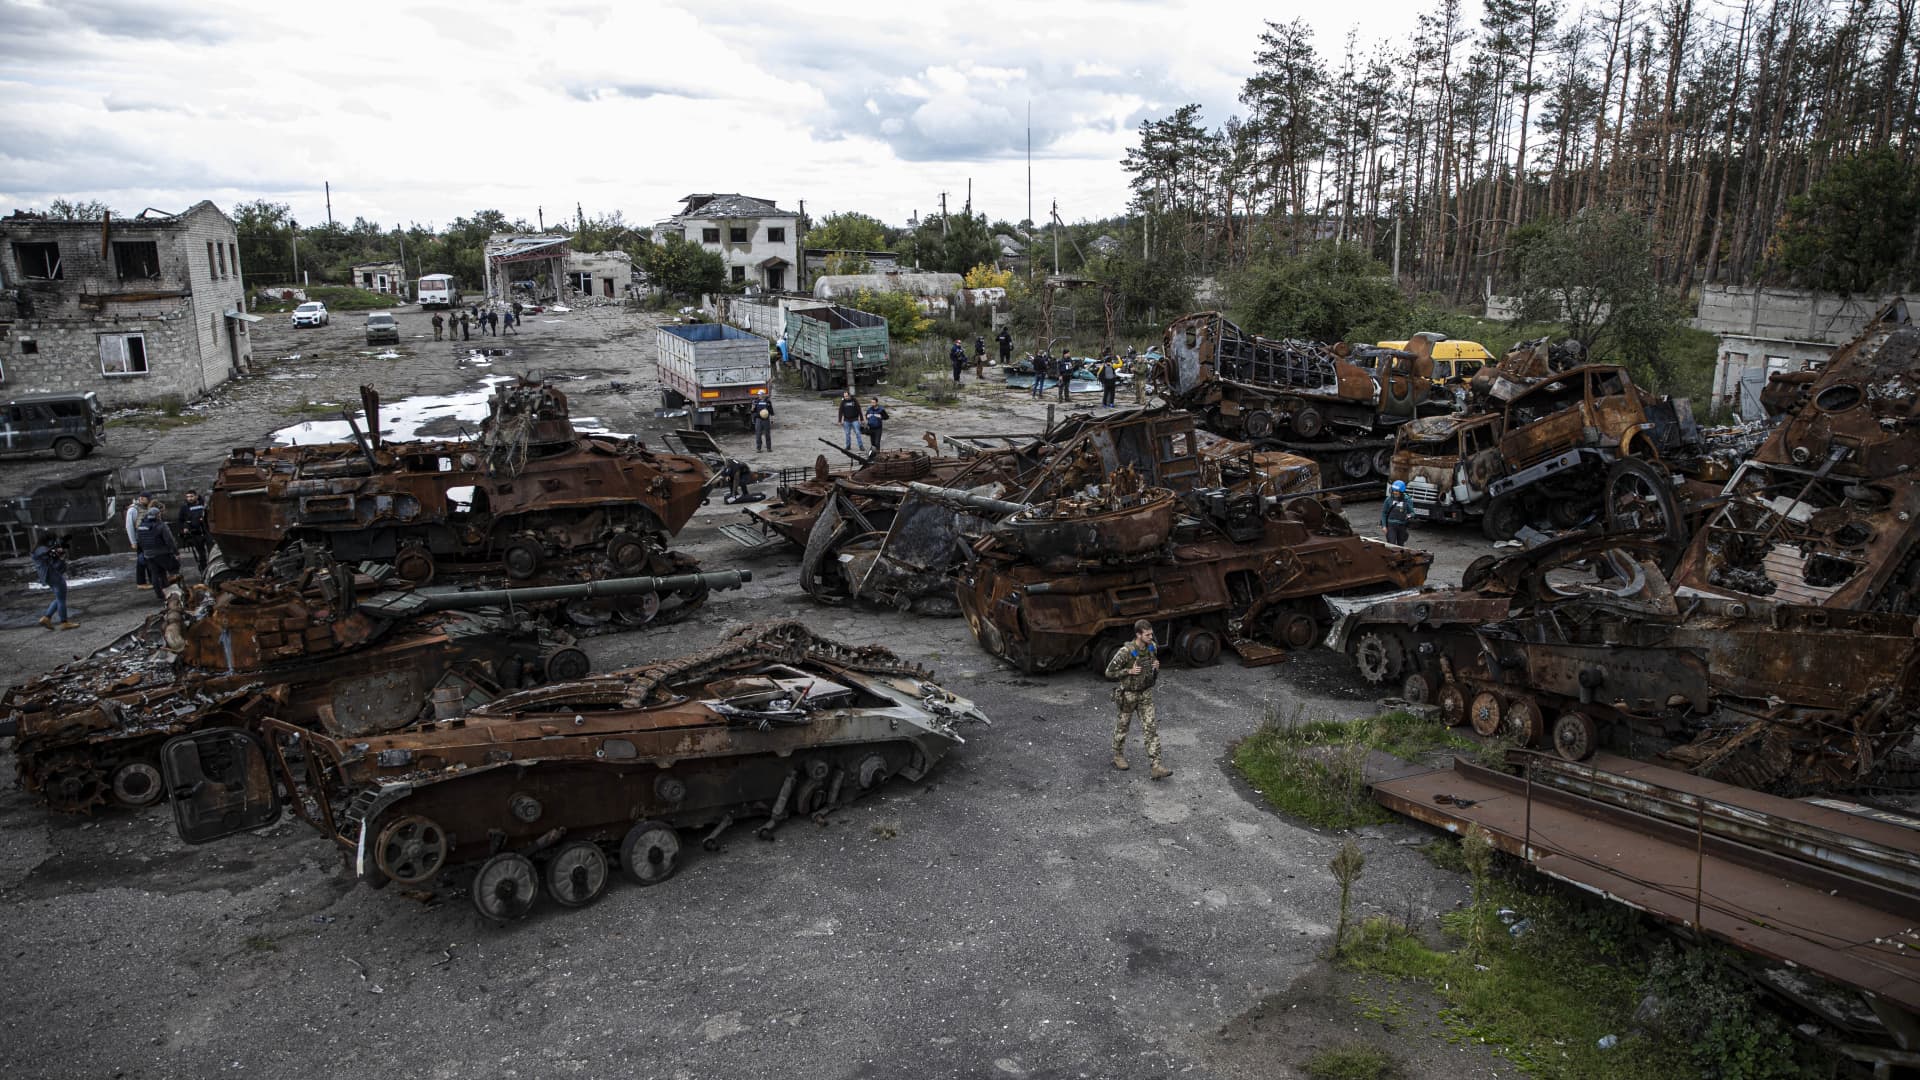 A view of destroyed armored vehicles and tanks belonging to Russian forces after Russian forces withdrawn from the city of Lyman in the Donetsk region (Donetsk Oblast), Ukraine on October 05, 202.